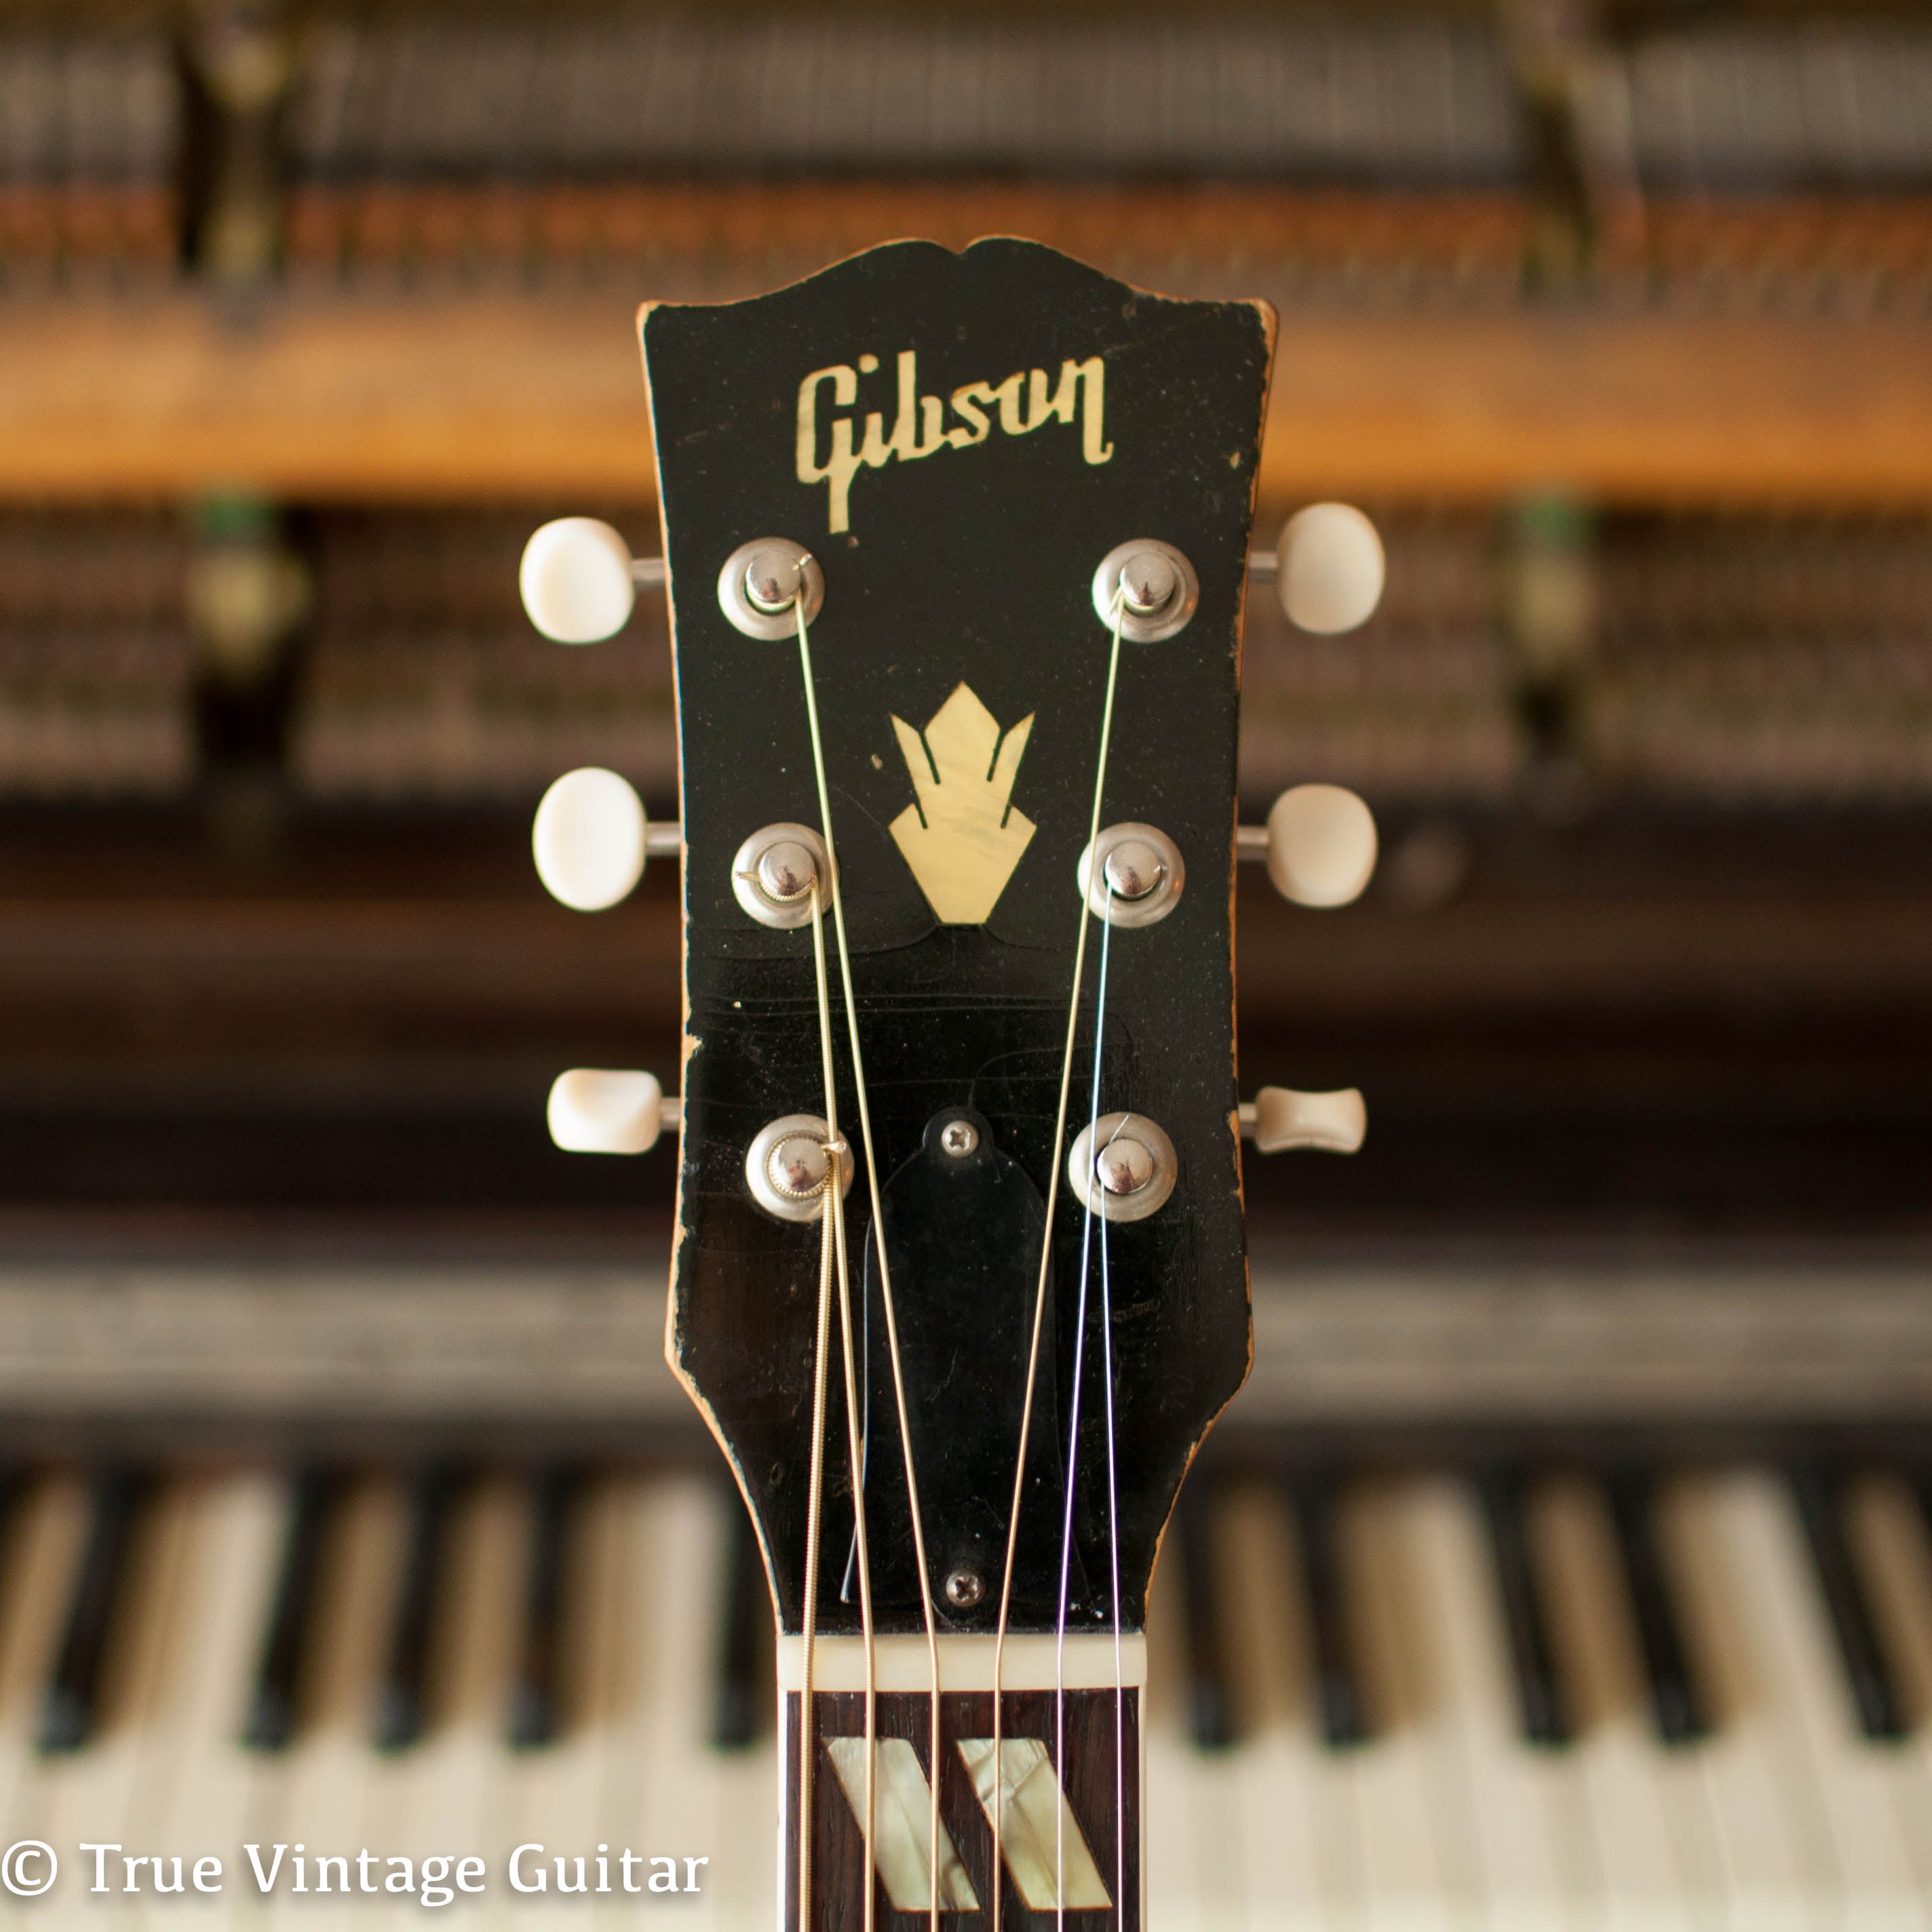 Gibson headstock pearl inlay 1957 Country Western